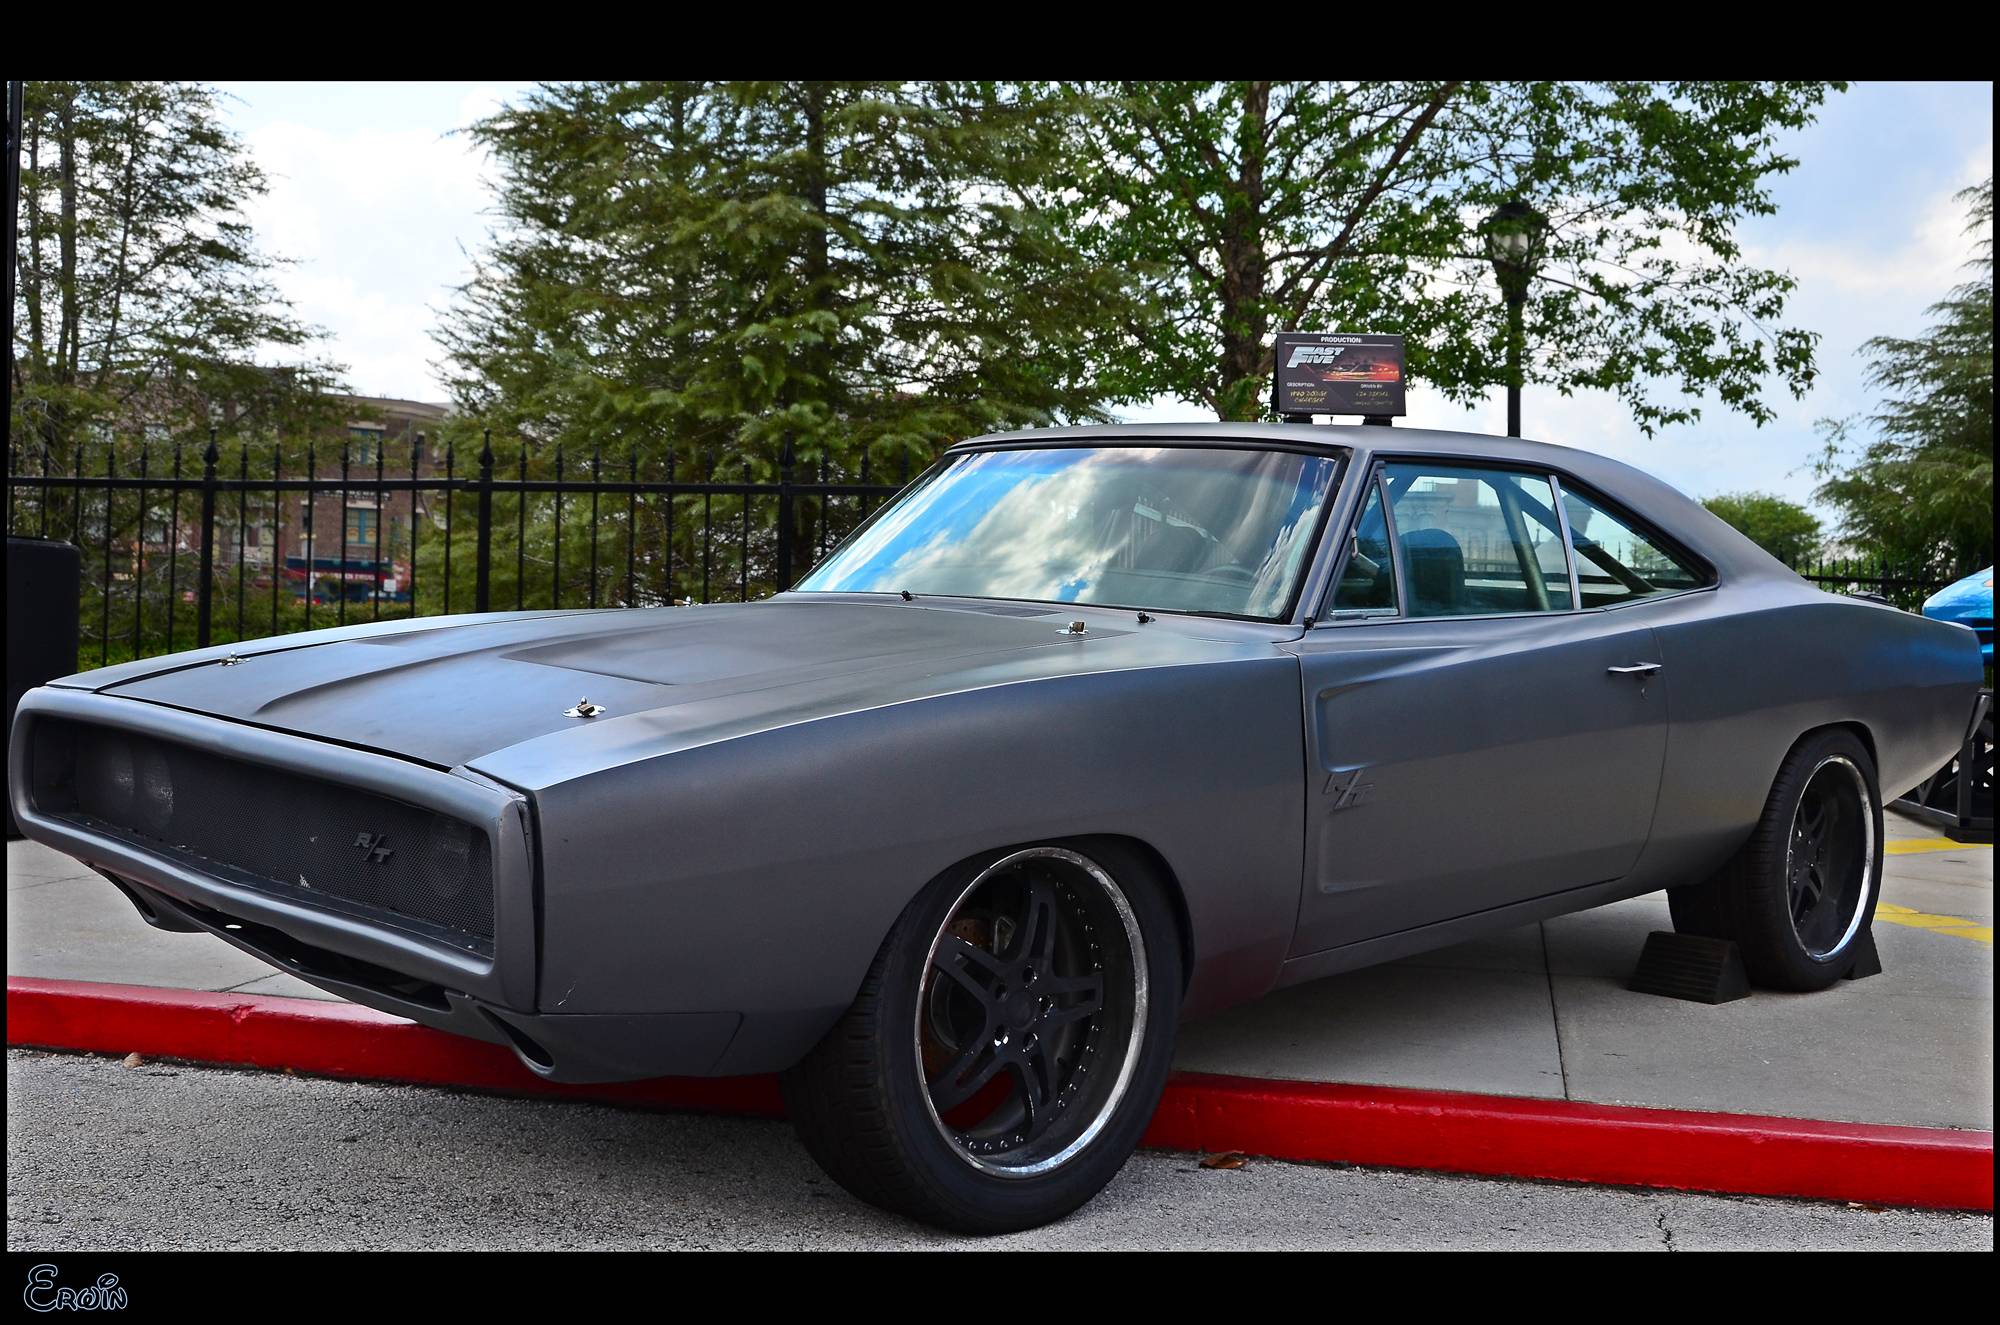 Dodge Charger Image. Picture and Videos